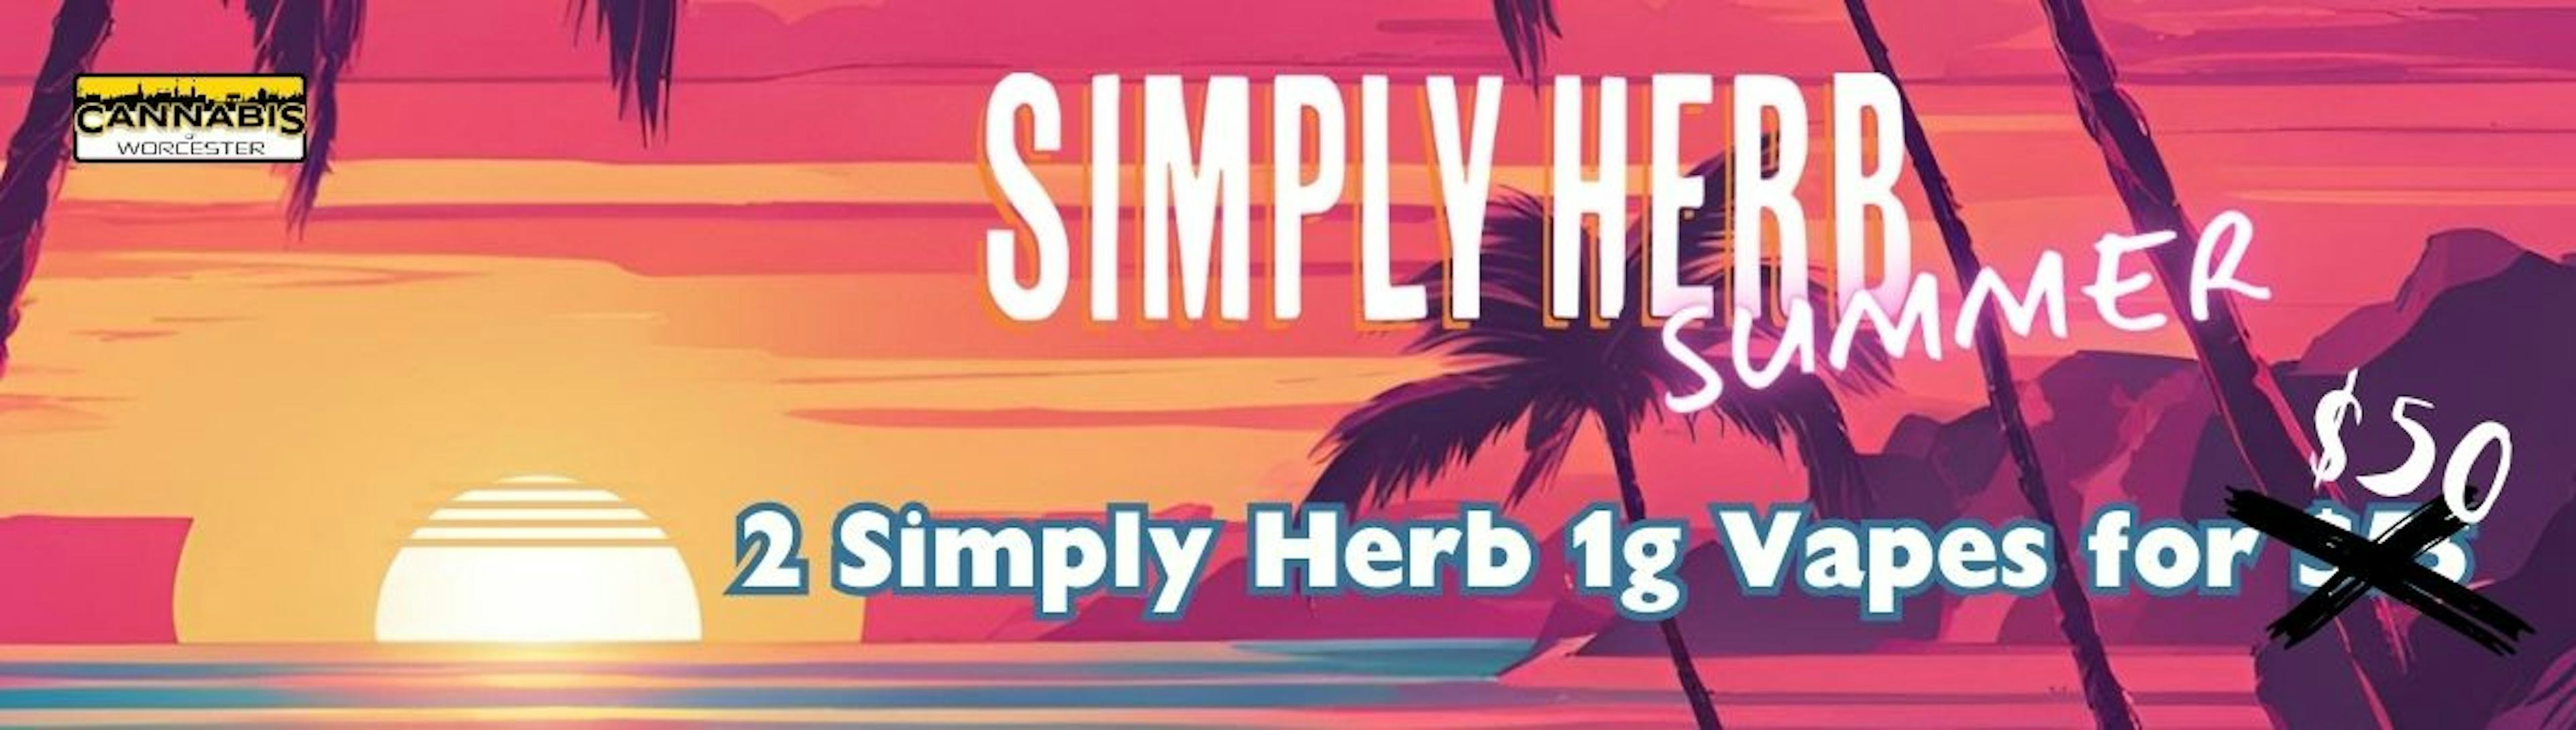 Simply Herb Cart 2x for $50